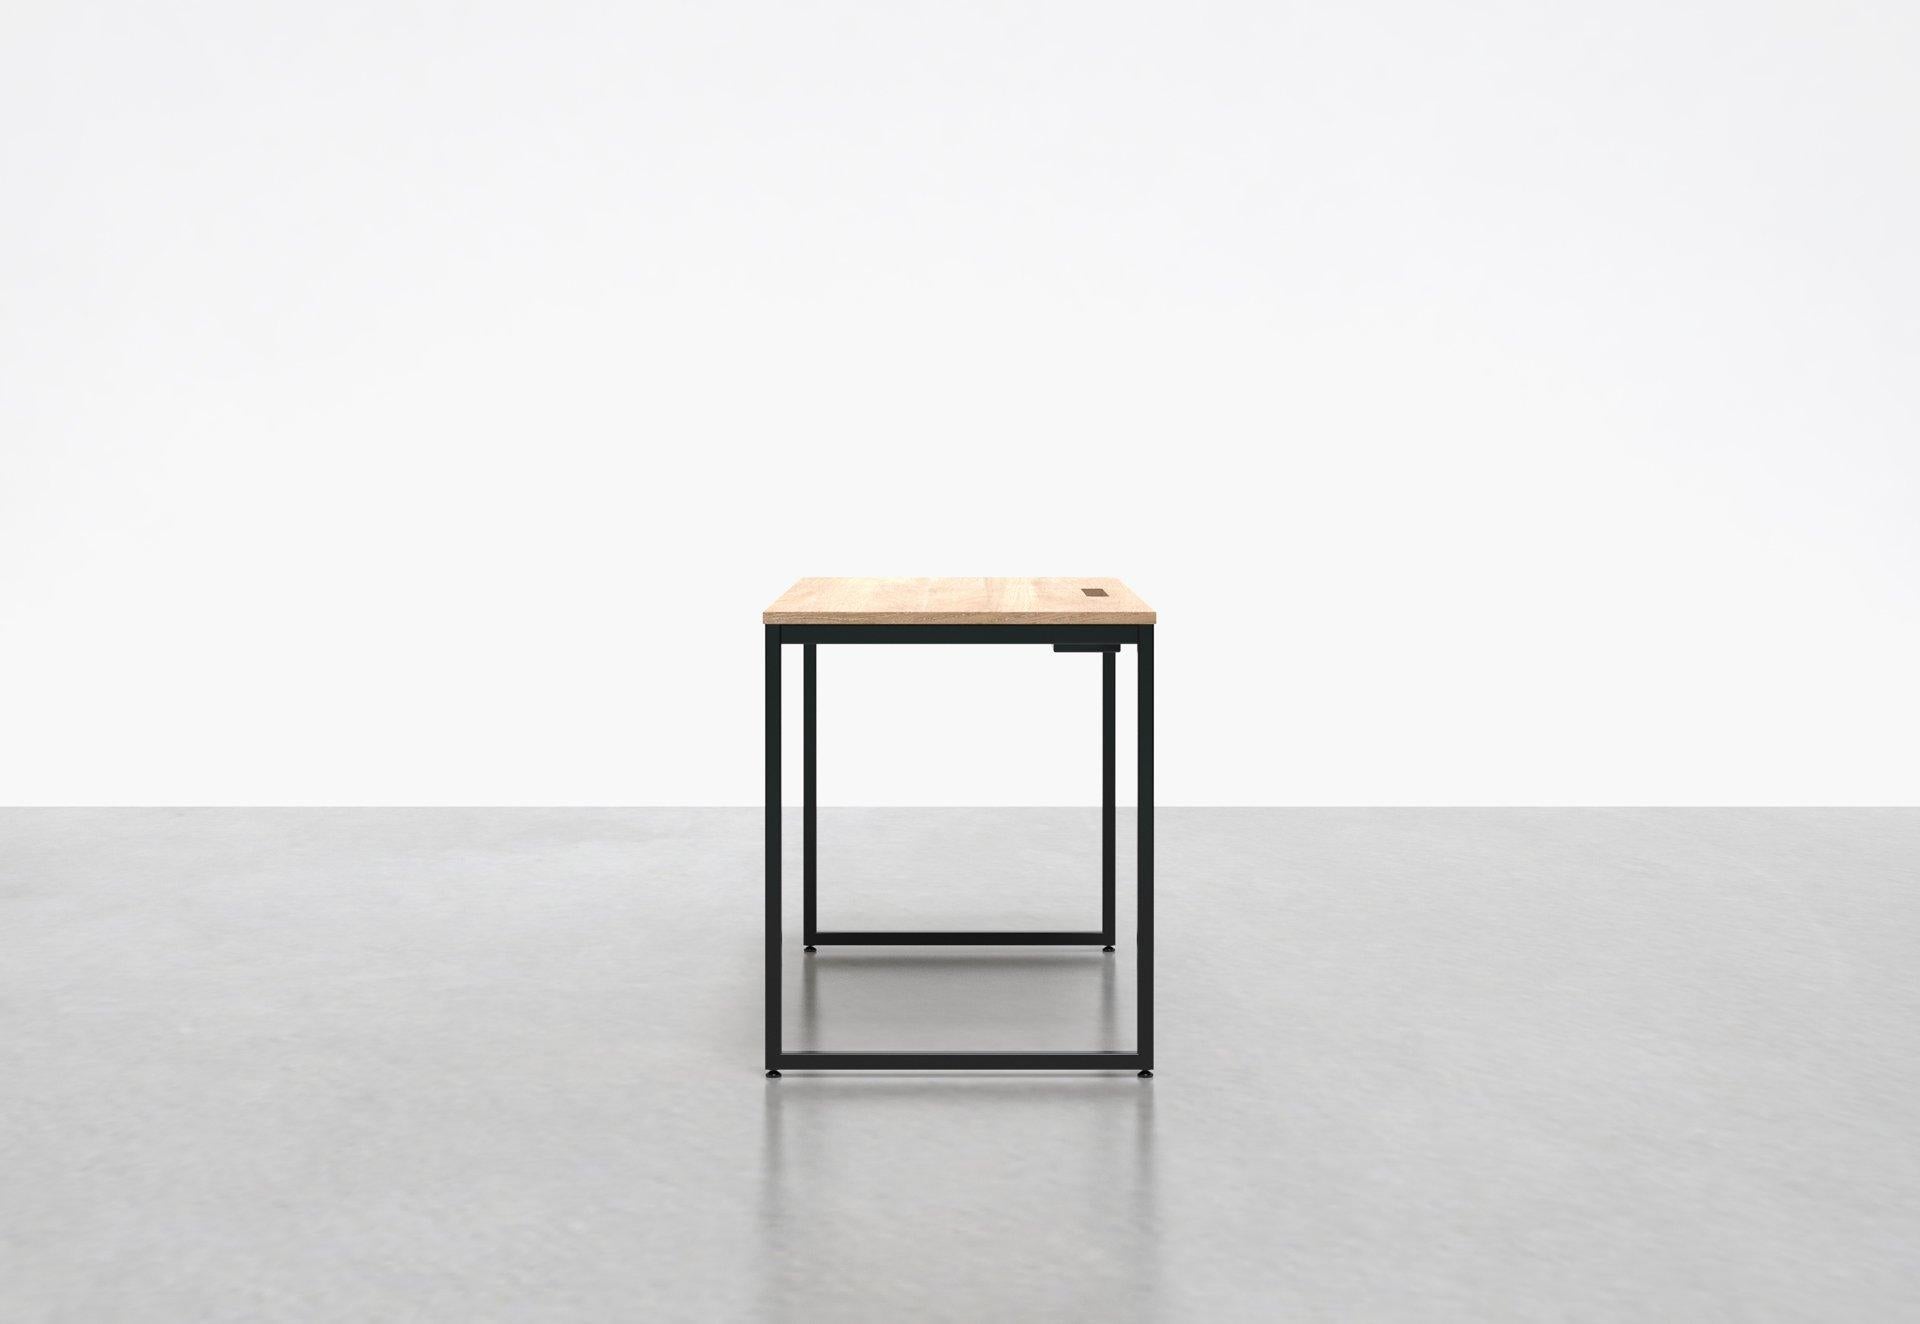 Inspired by the concept of an architect's desk, our minimal 1 x 1 desk has box legs and is perfect in your home office or at the office. The 1 x 1 desk comes equipped with a built-in compartment that holds power-strips and helps conceal cables.